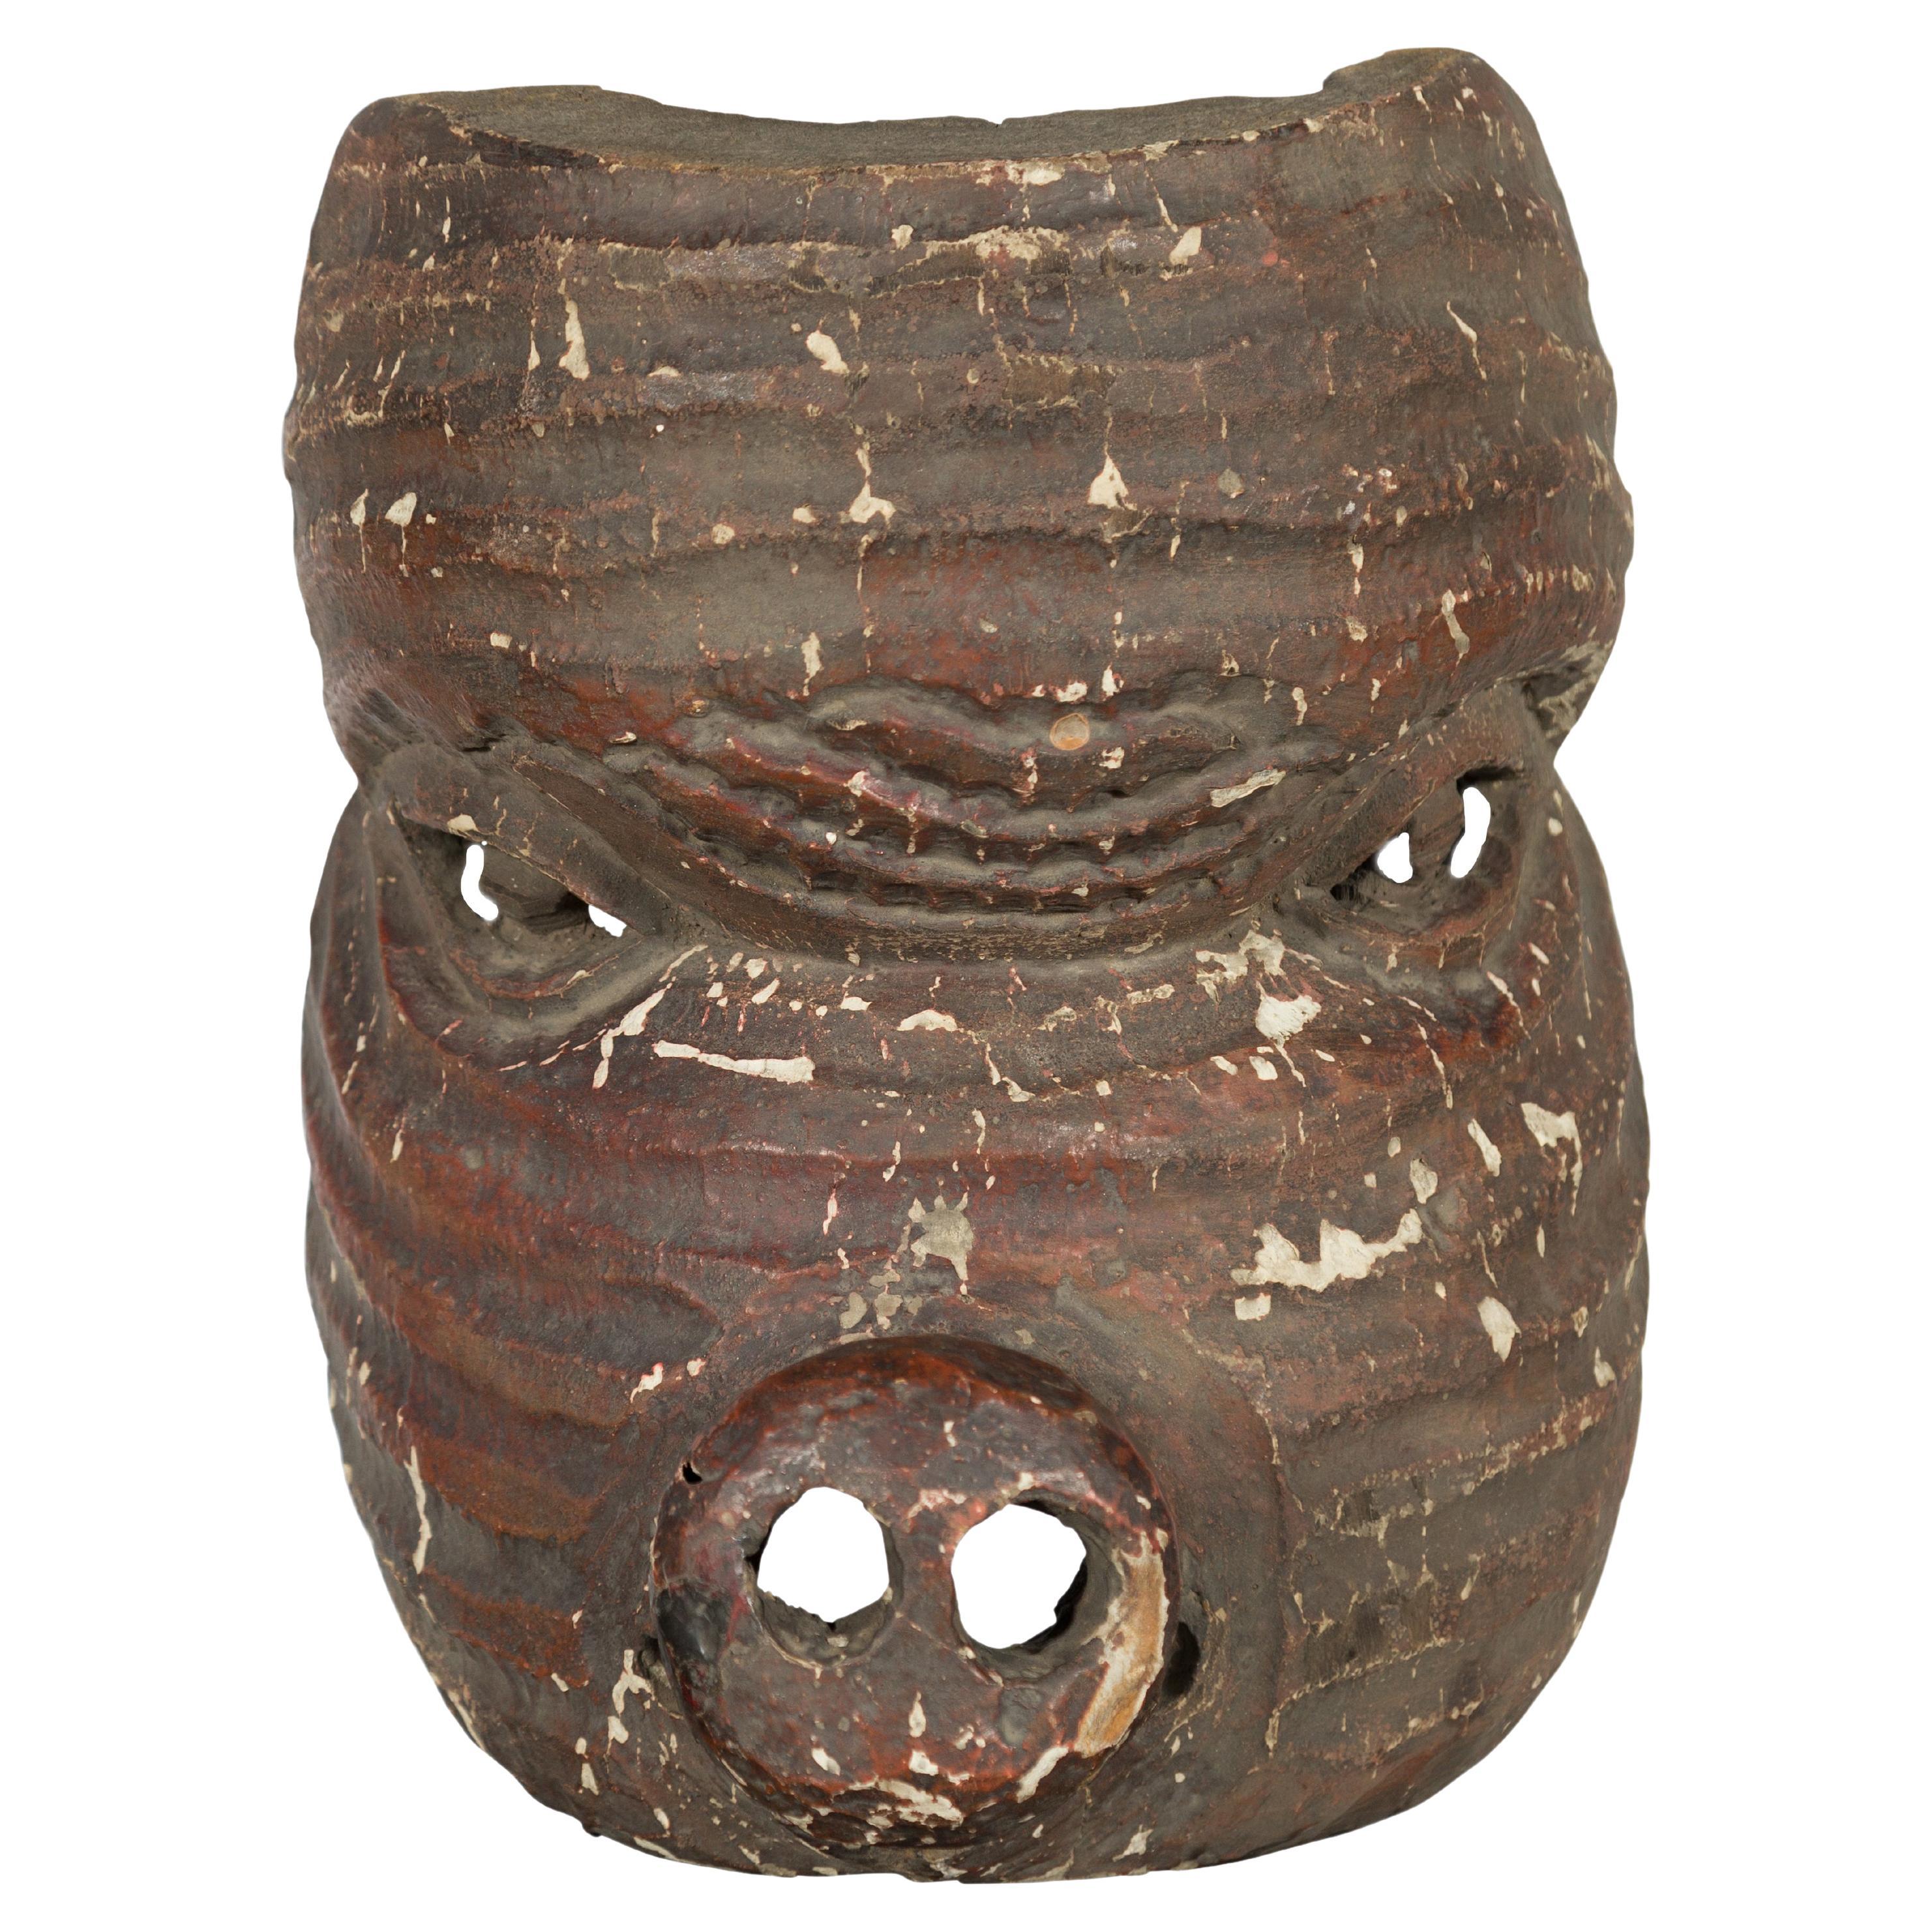 Antique Thai Tribal Carved Wooden Mask Depicting a Swine with Pierced Eyes For Sale